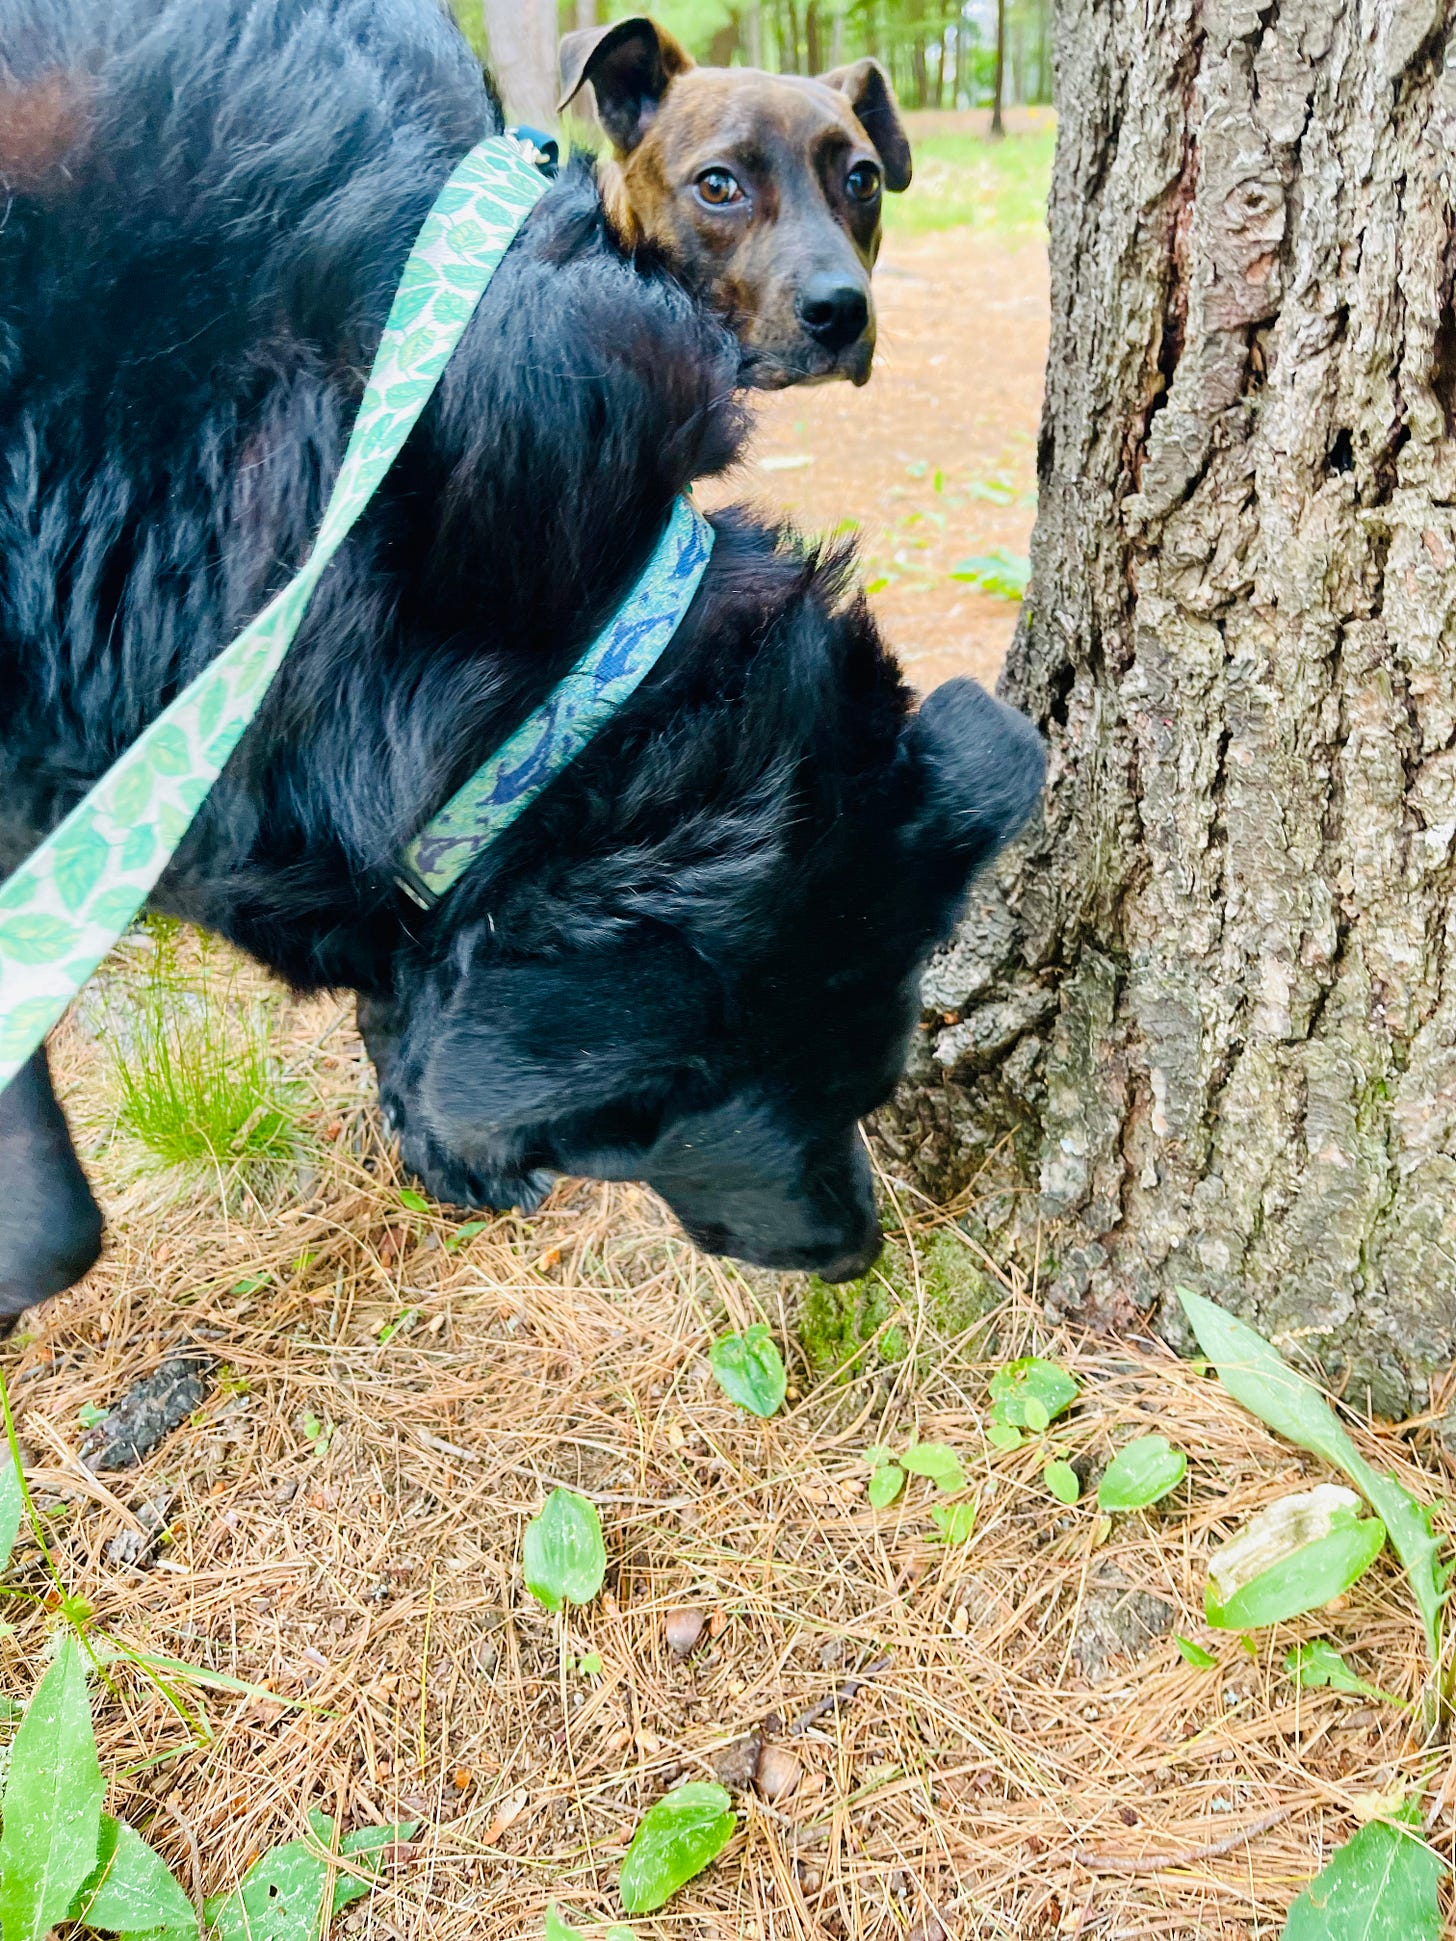 Two dogs by the base of a tree. One dog is sniffing. The other dog looks worried and right at the camera.